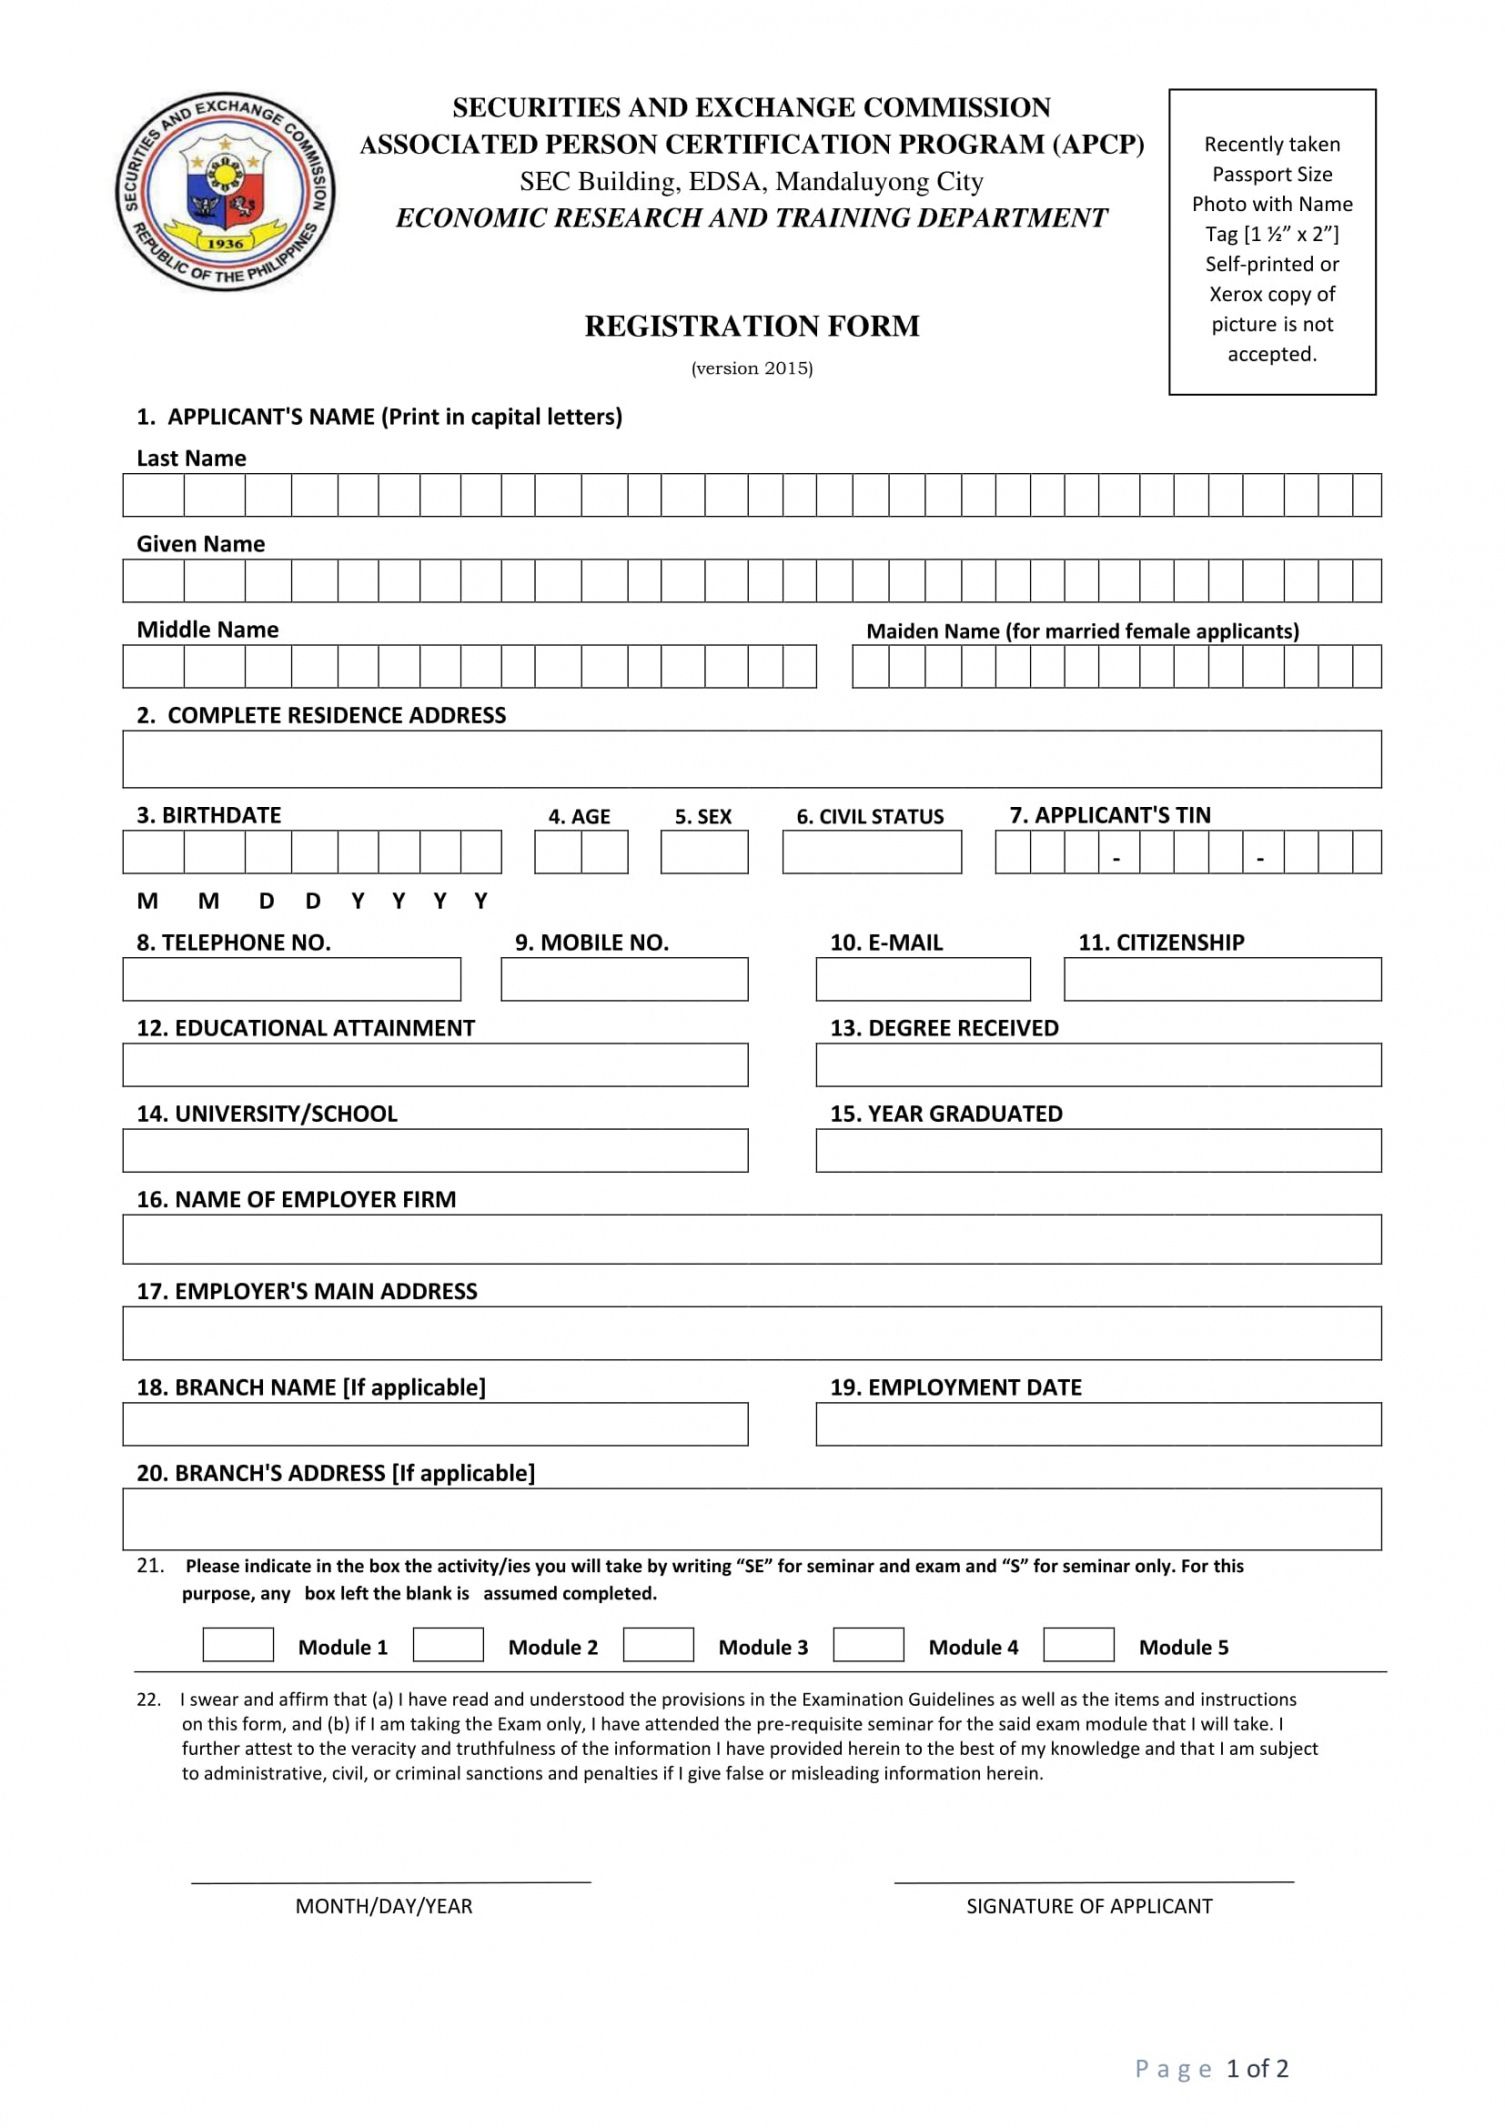 registration-form-template-word-printable-printable-forms-free-online